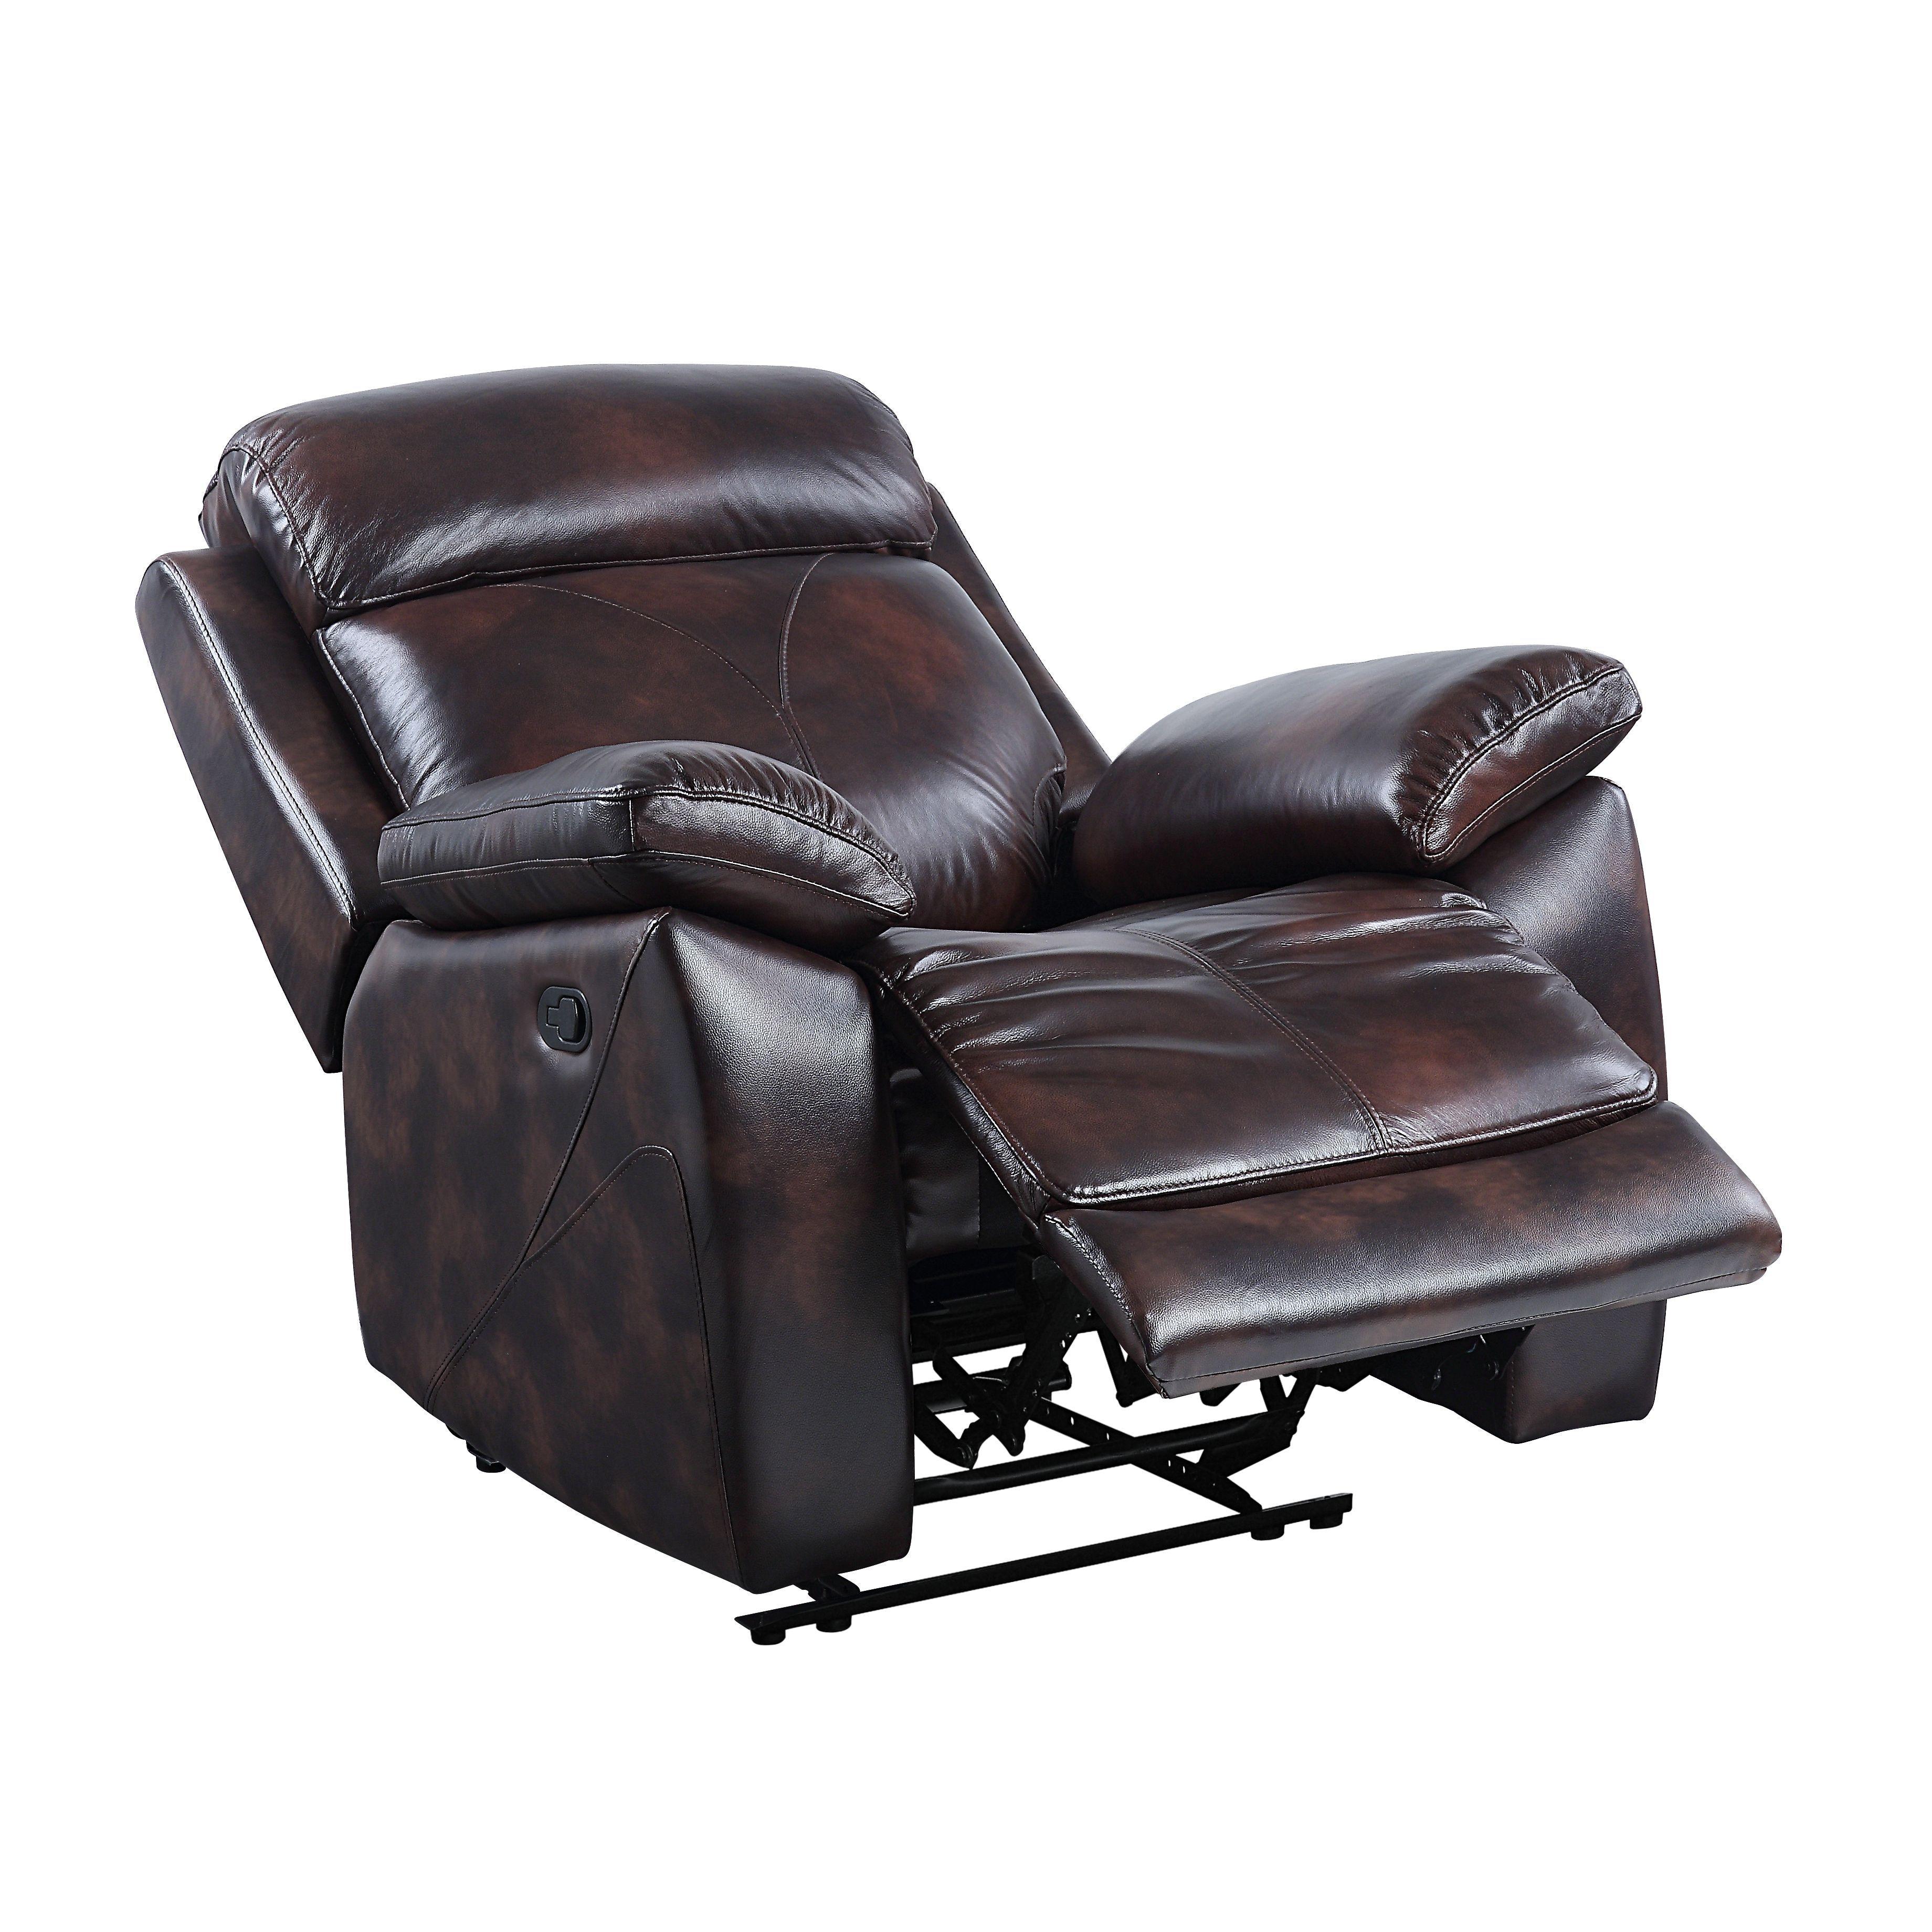 Contemporary Recliner Perfiel LV00068 in Dark Brown Leather